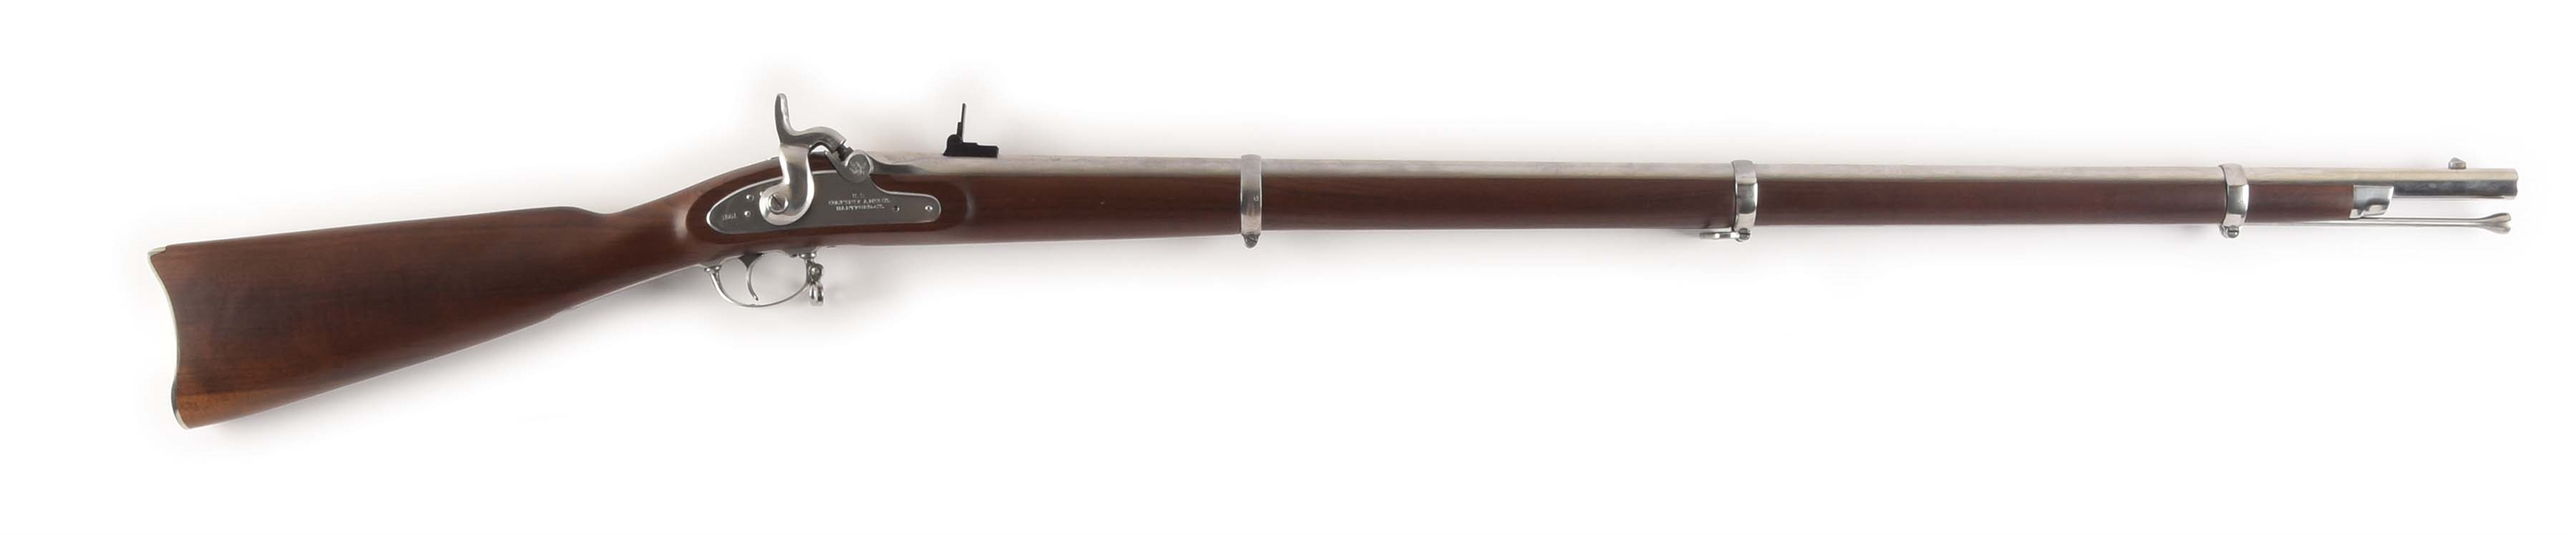 (A) COLT SIGNATURE SERIES REPRODUCTION 1861 SPECIAL MODEL PERCUSSION RIFLED MUSKET.